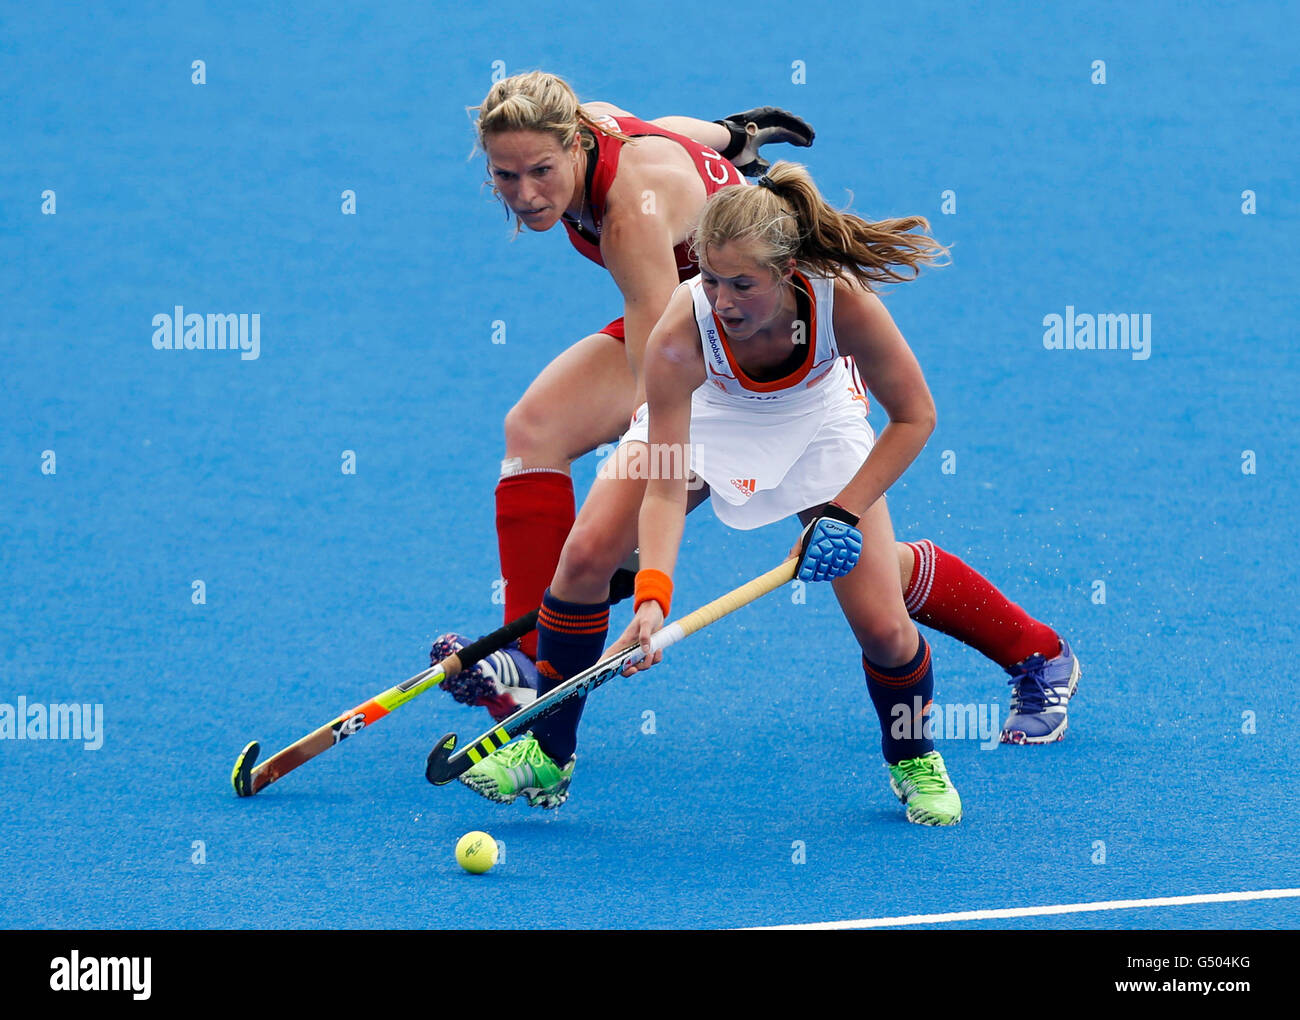 Netherland's Xan de Waard and Great Britain's Susannah Townsend during the pool match between Netherlands and Great Britain on day two of the FIH Women's Champions Trophy at the Queen Elizabeth Olympic Park, London. Stock Photo